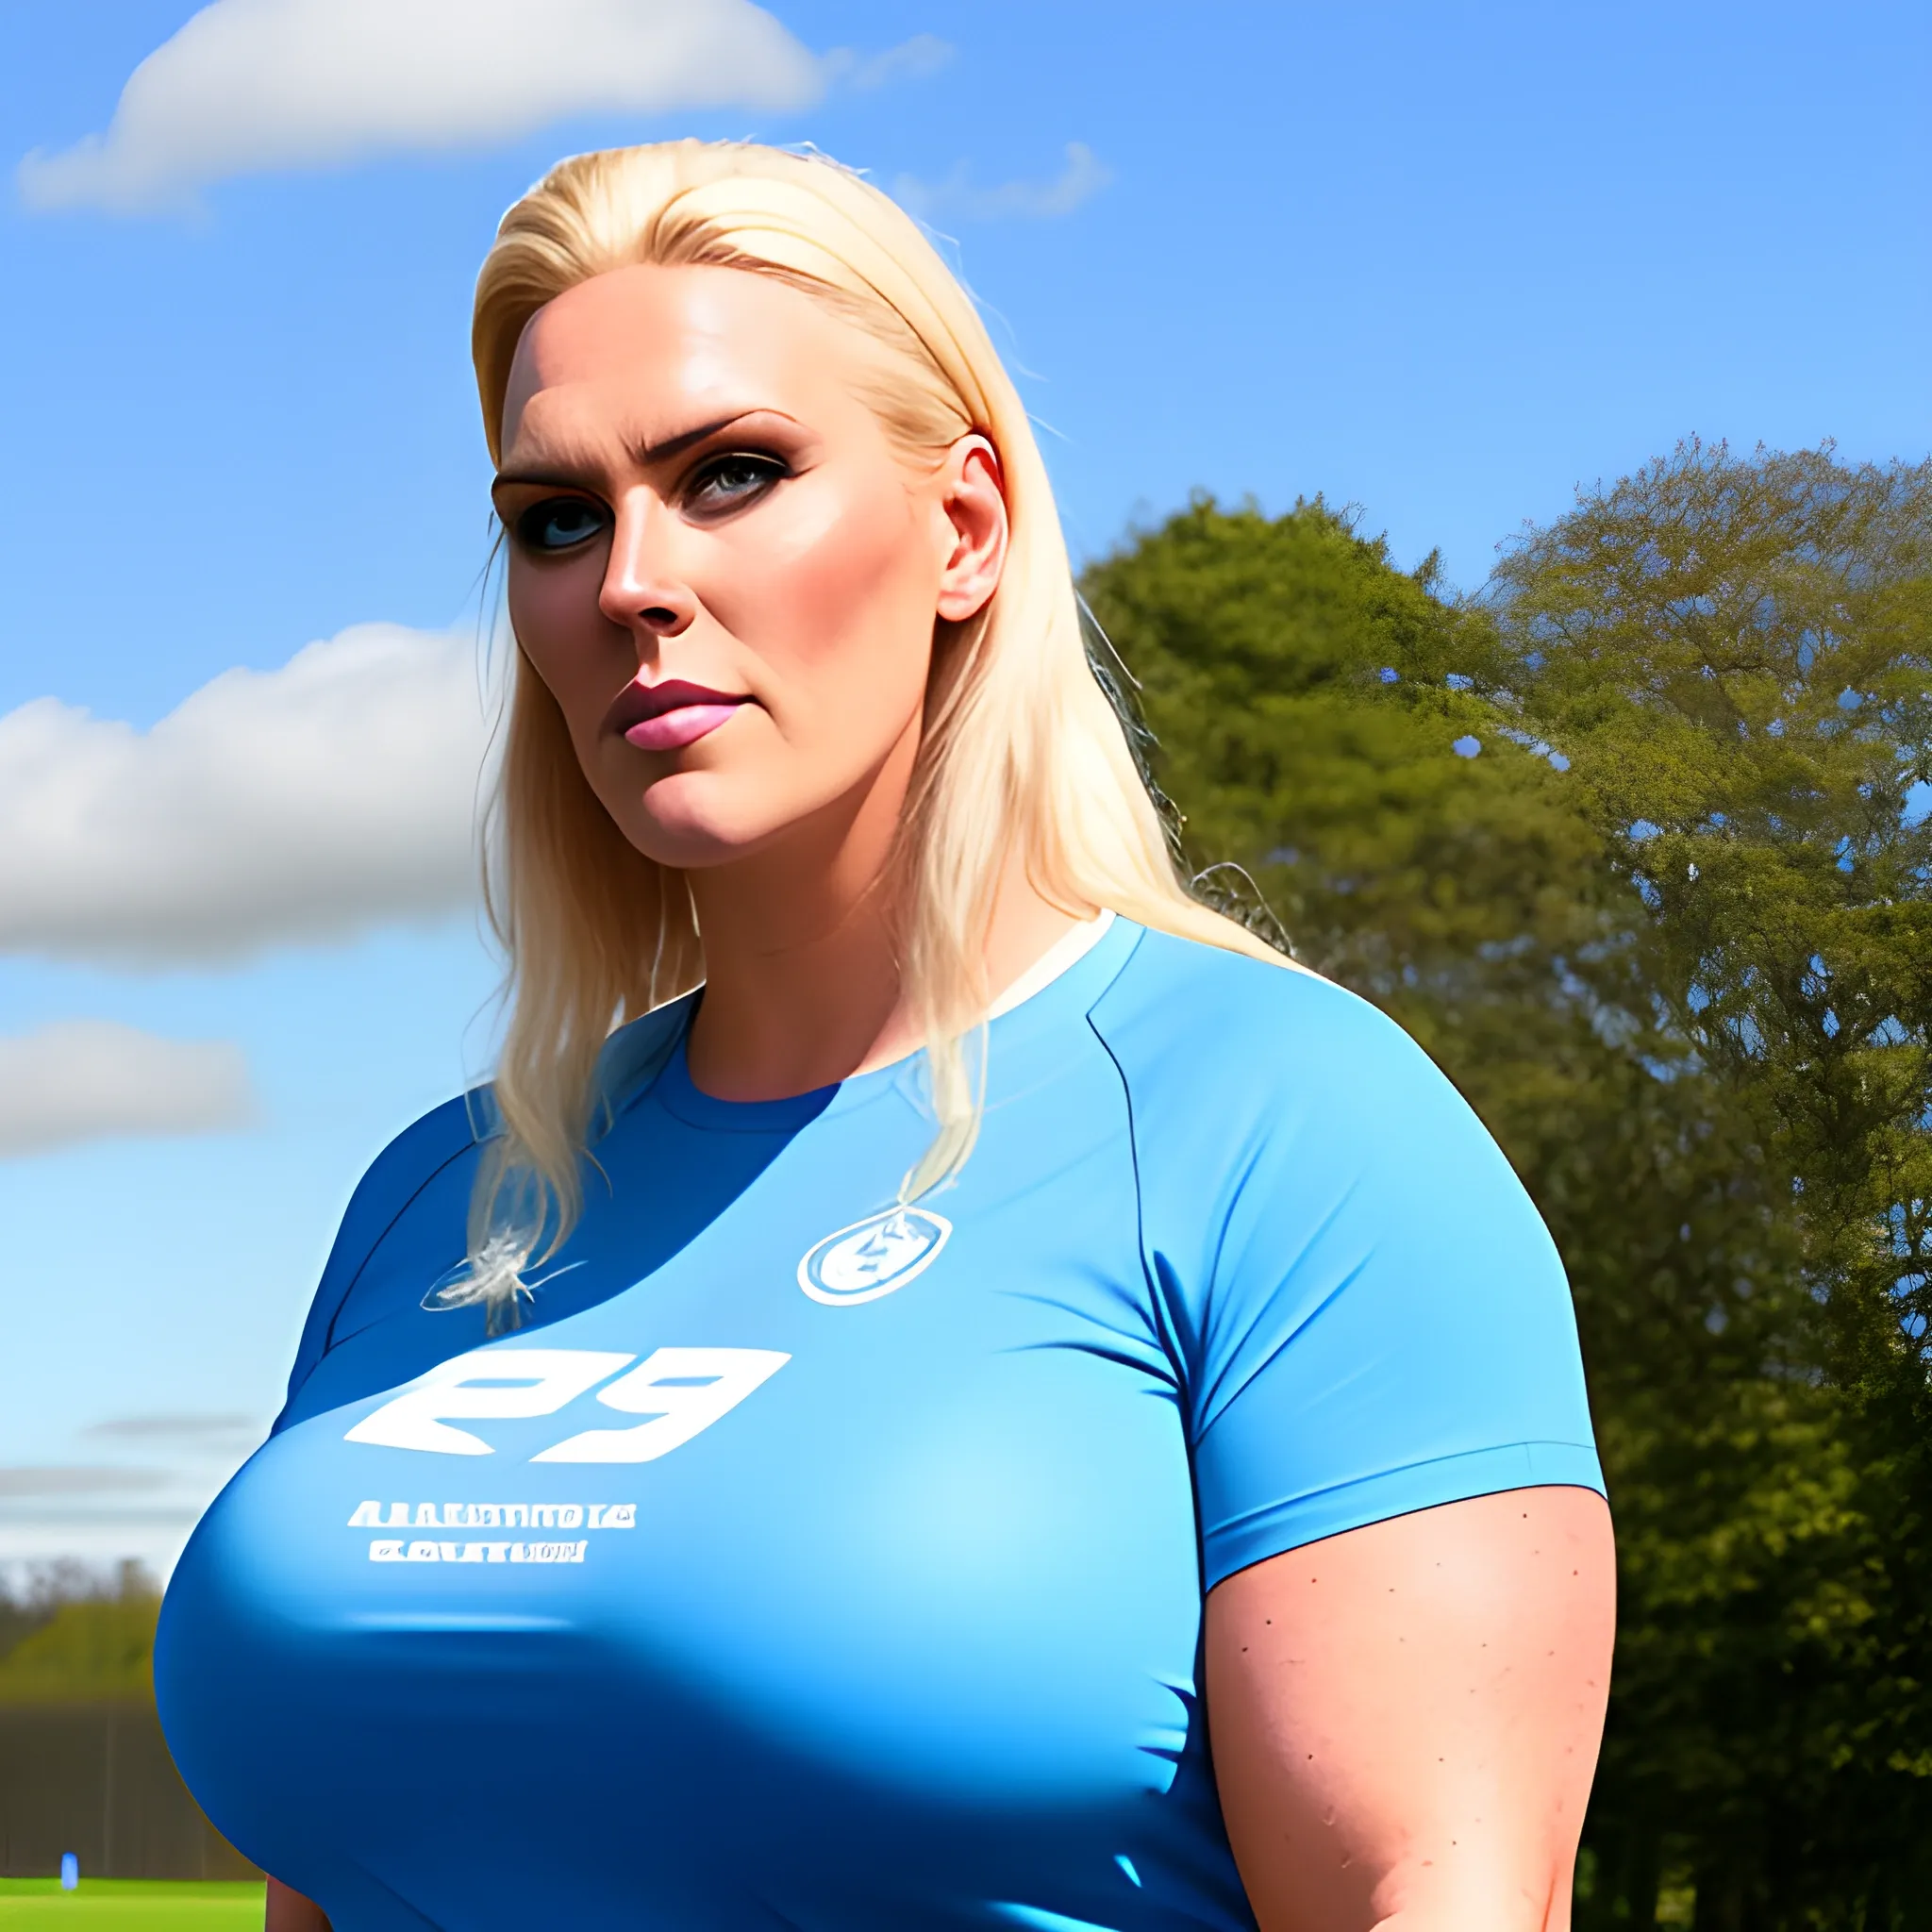 8 ft tall naturally beautiful and strong massive plus size blonde teenage girl in T-shirt and shorts 
standing on training ground under blue sky